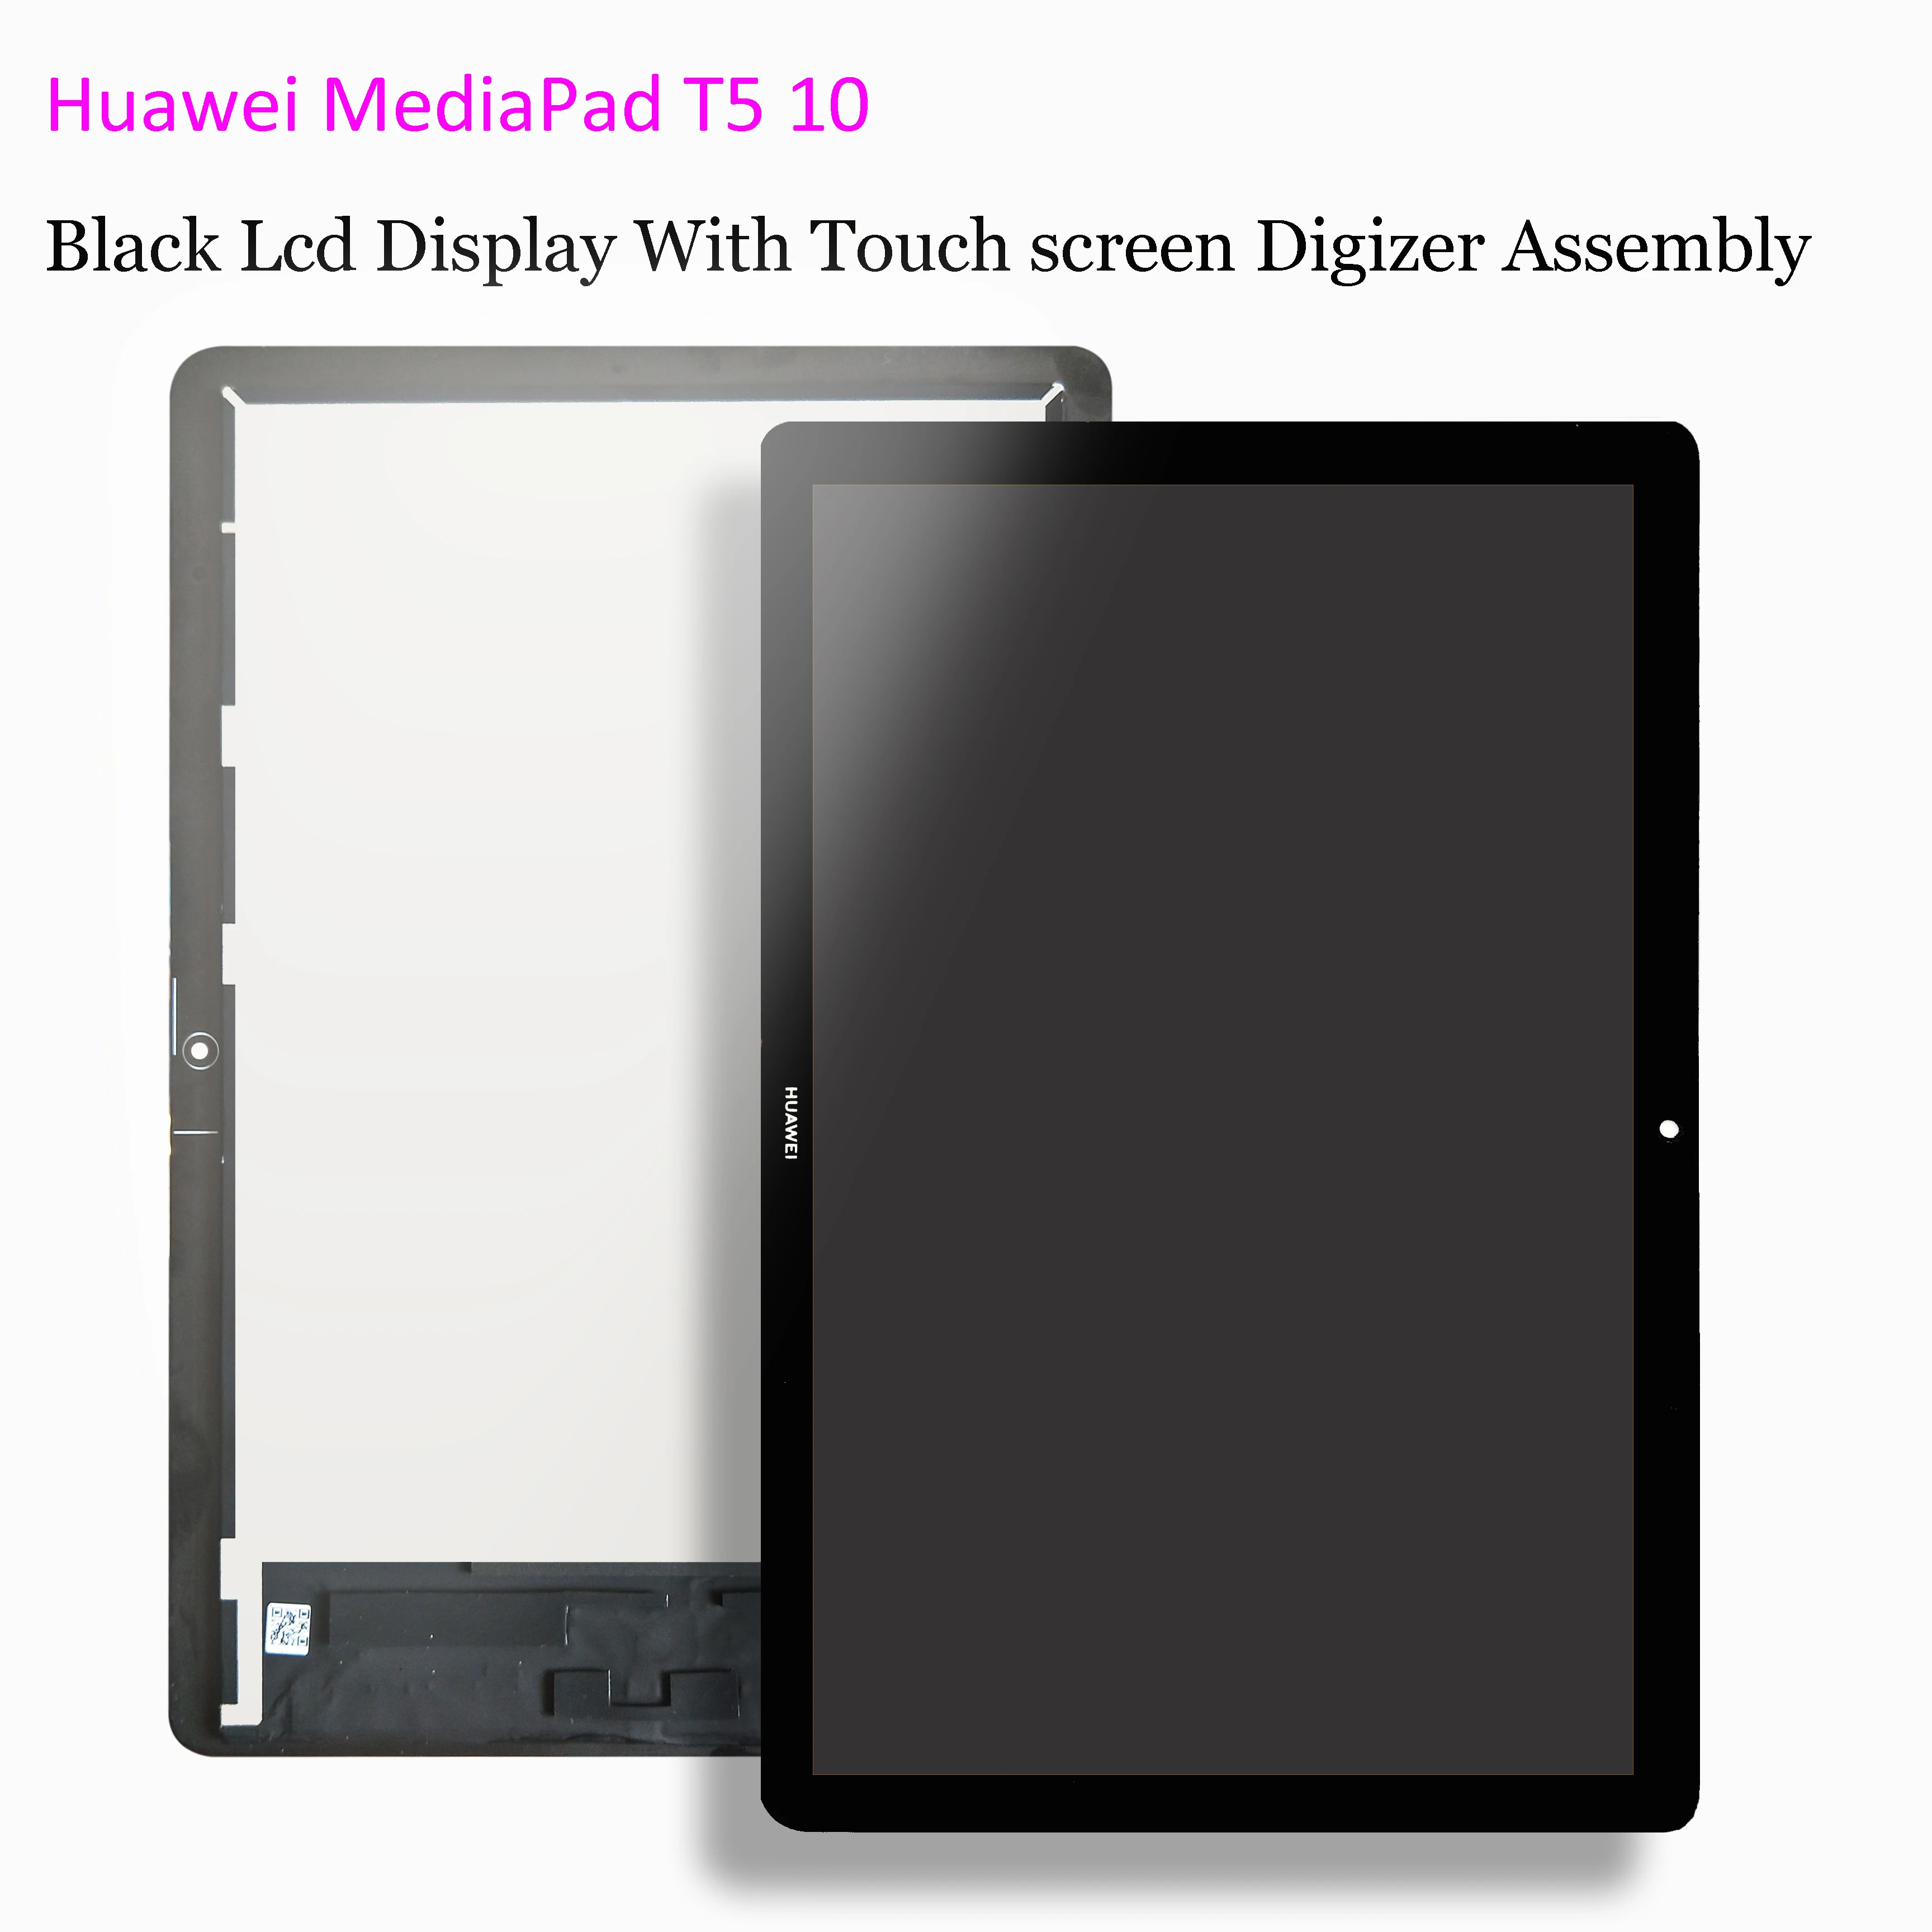 mediapad t5 10 ags2-l09 ags2-w09 ags2-l03 ags2-w19 tablet